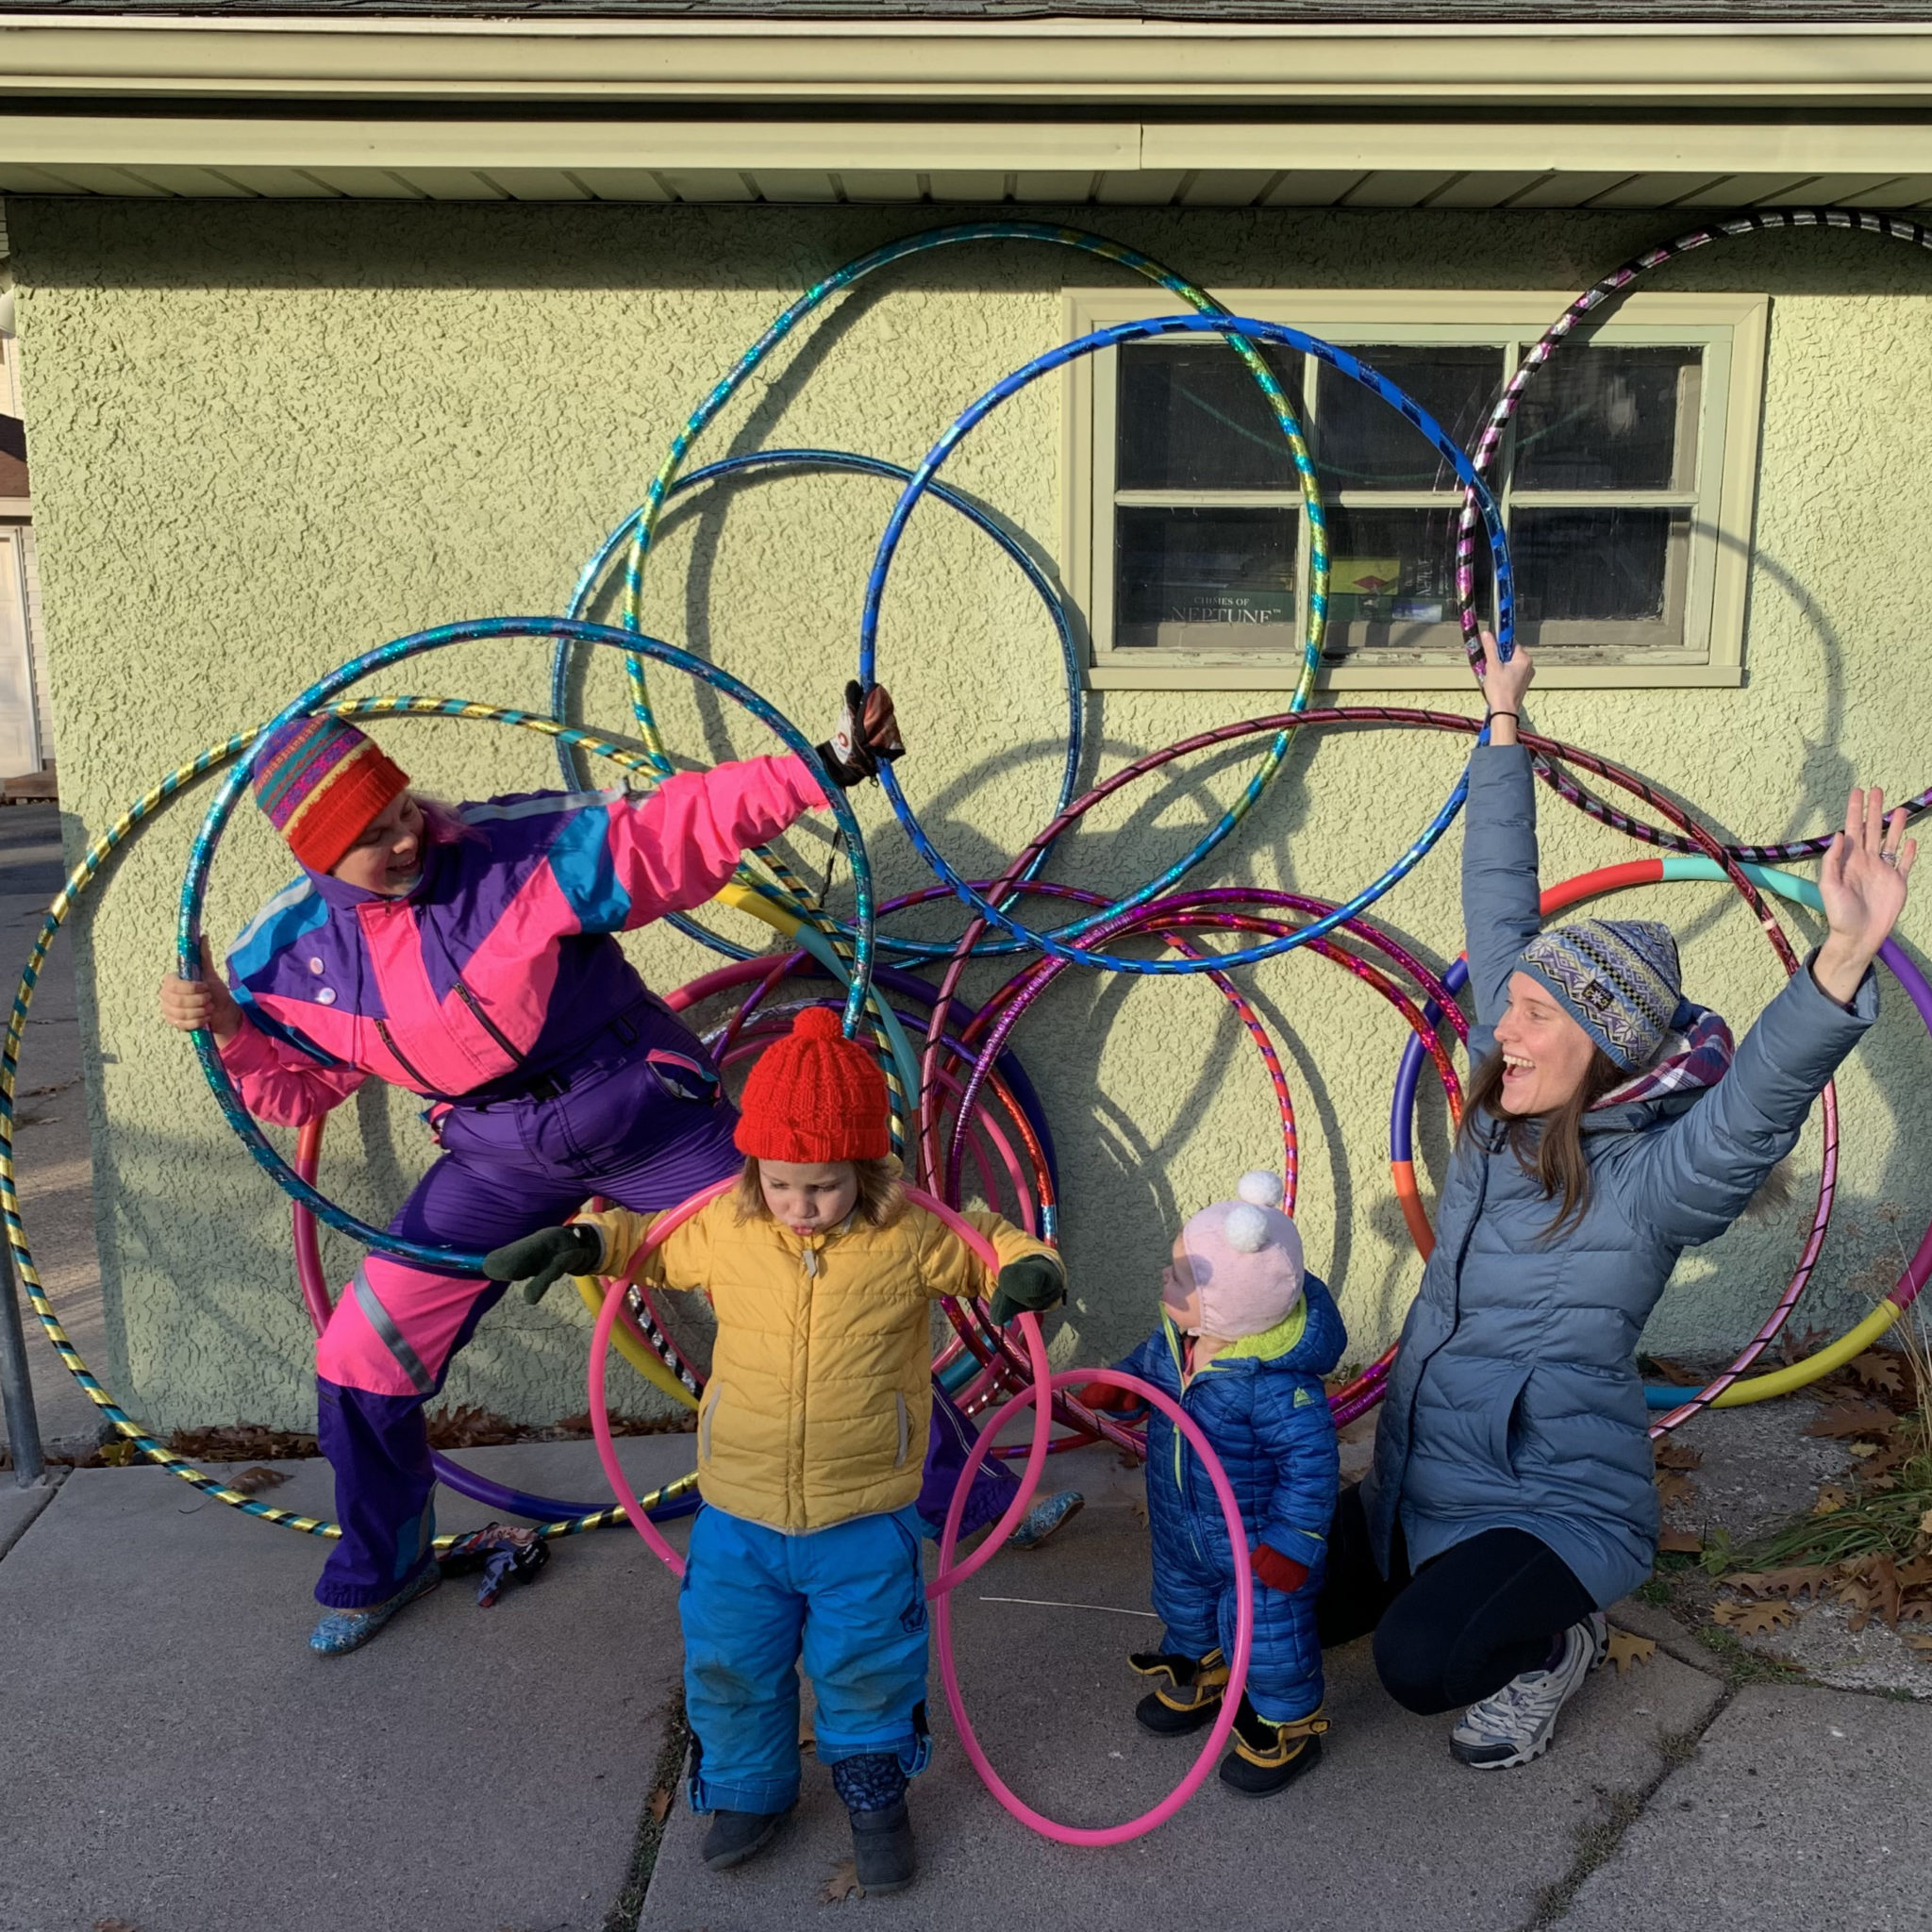 two adults and a kid, all in snowsuits, pose with a dozen hula hoops